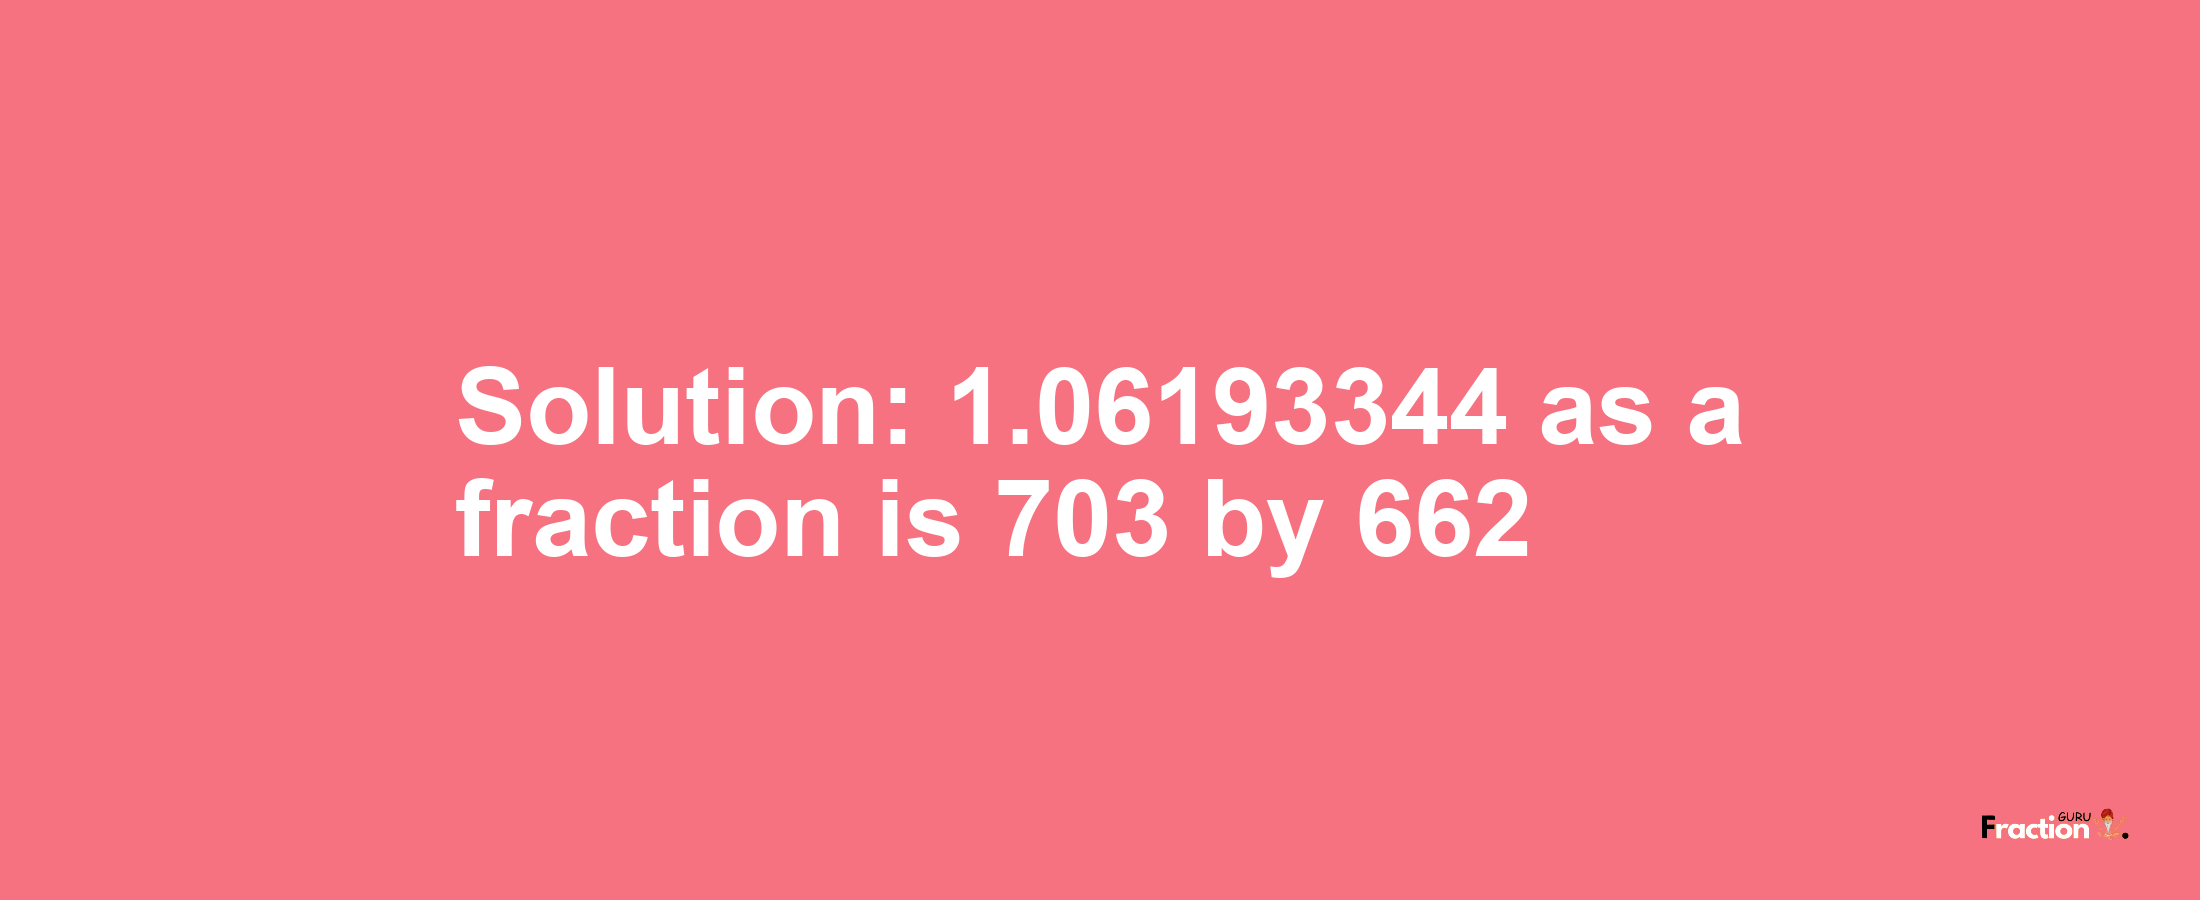 Solution:1.06193344 as a fraction is 703/662